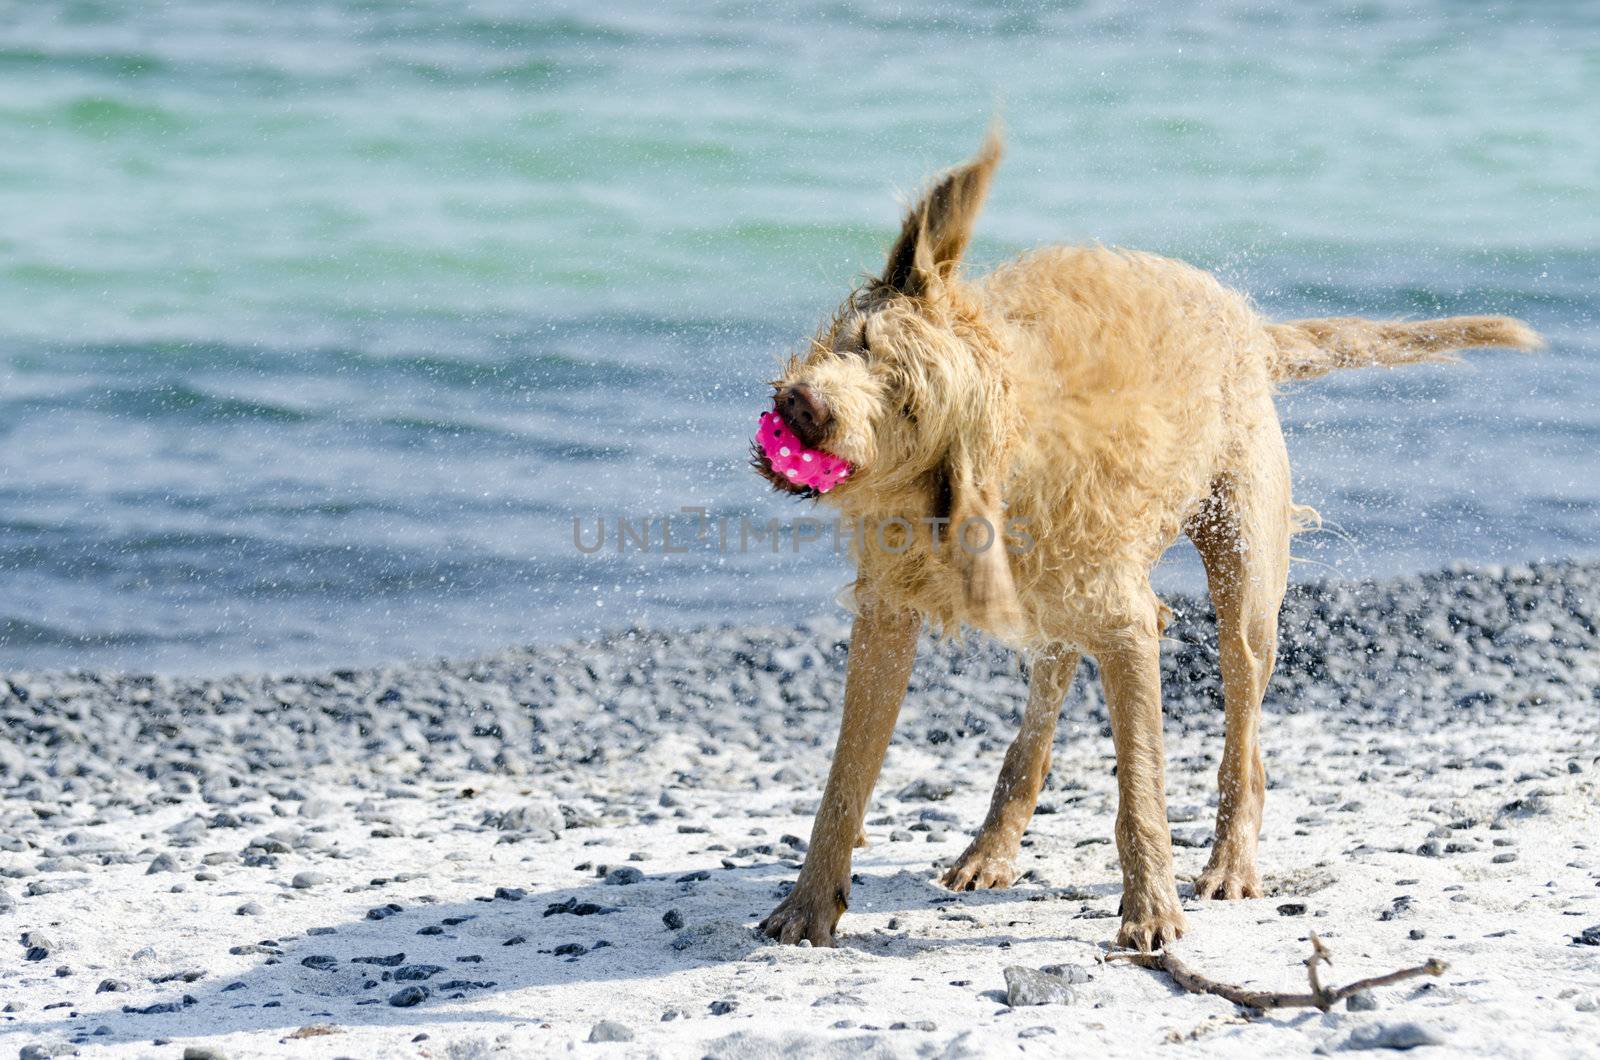 Selective focus on the dogs nose as it shakes the water after coming out of the lake